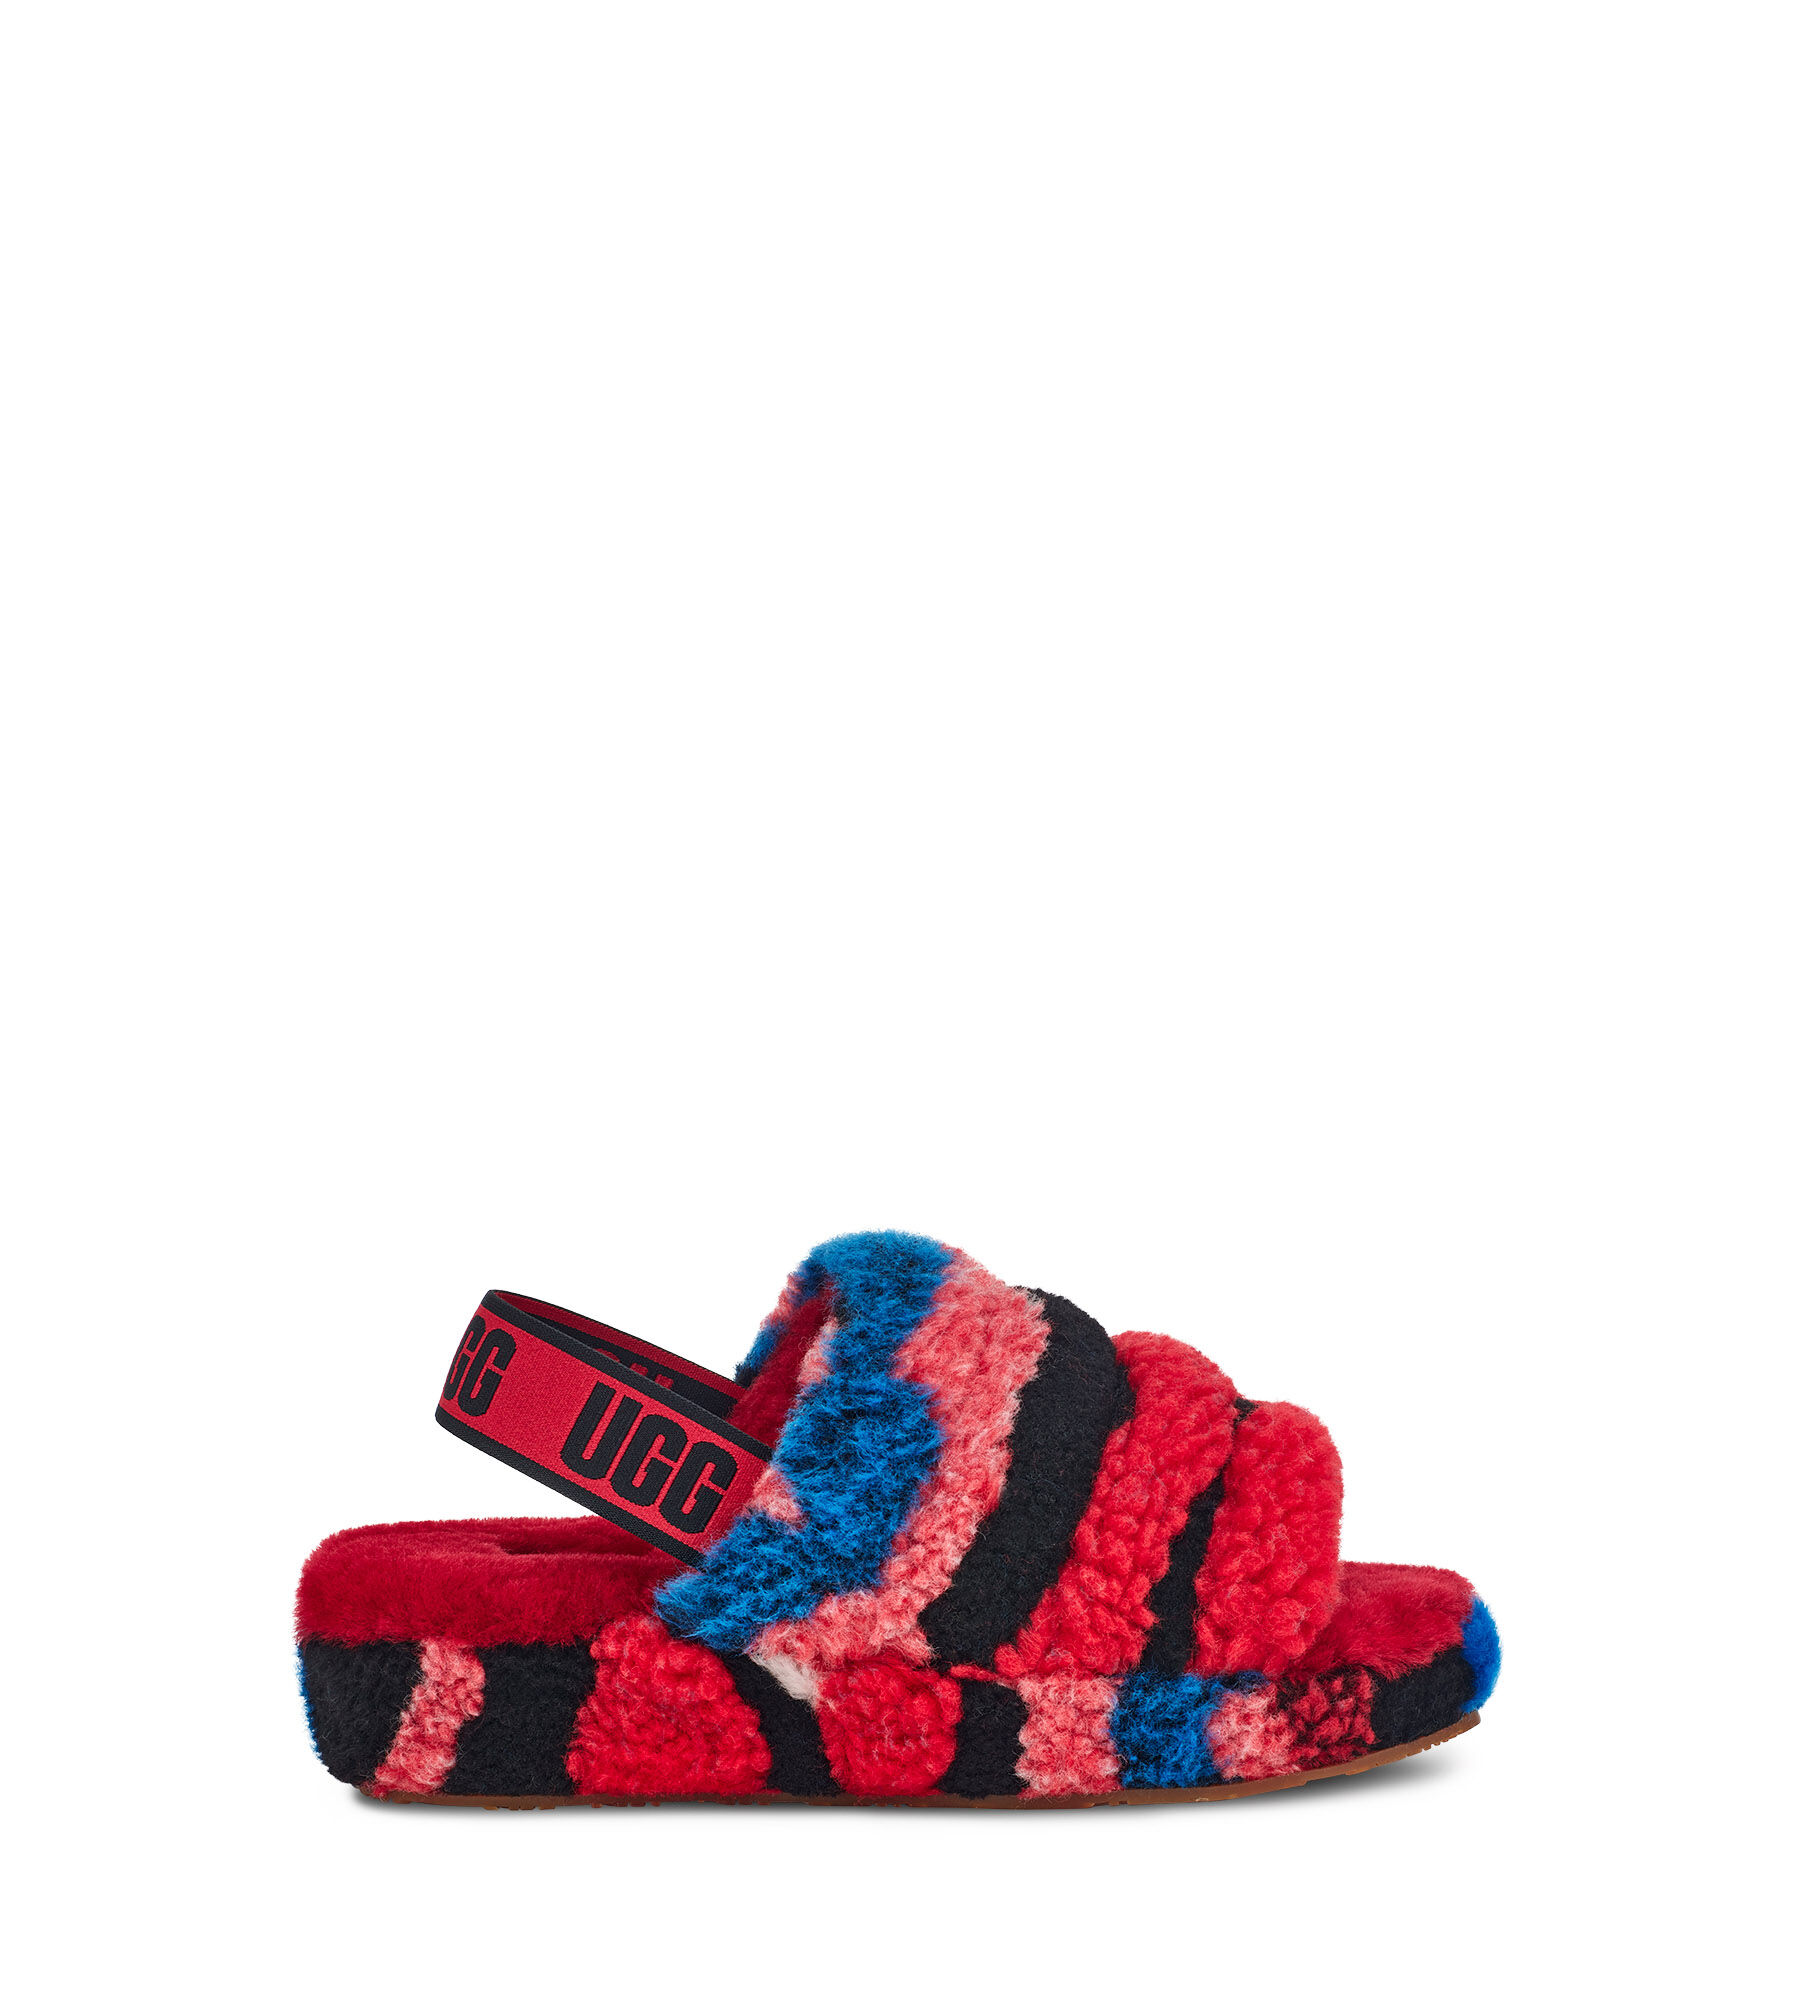 red ugg slippers in store